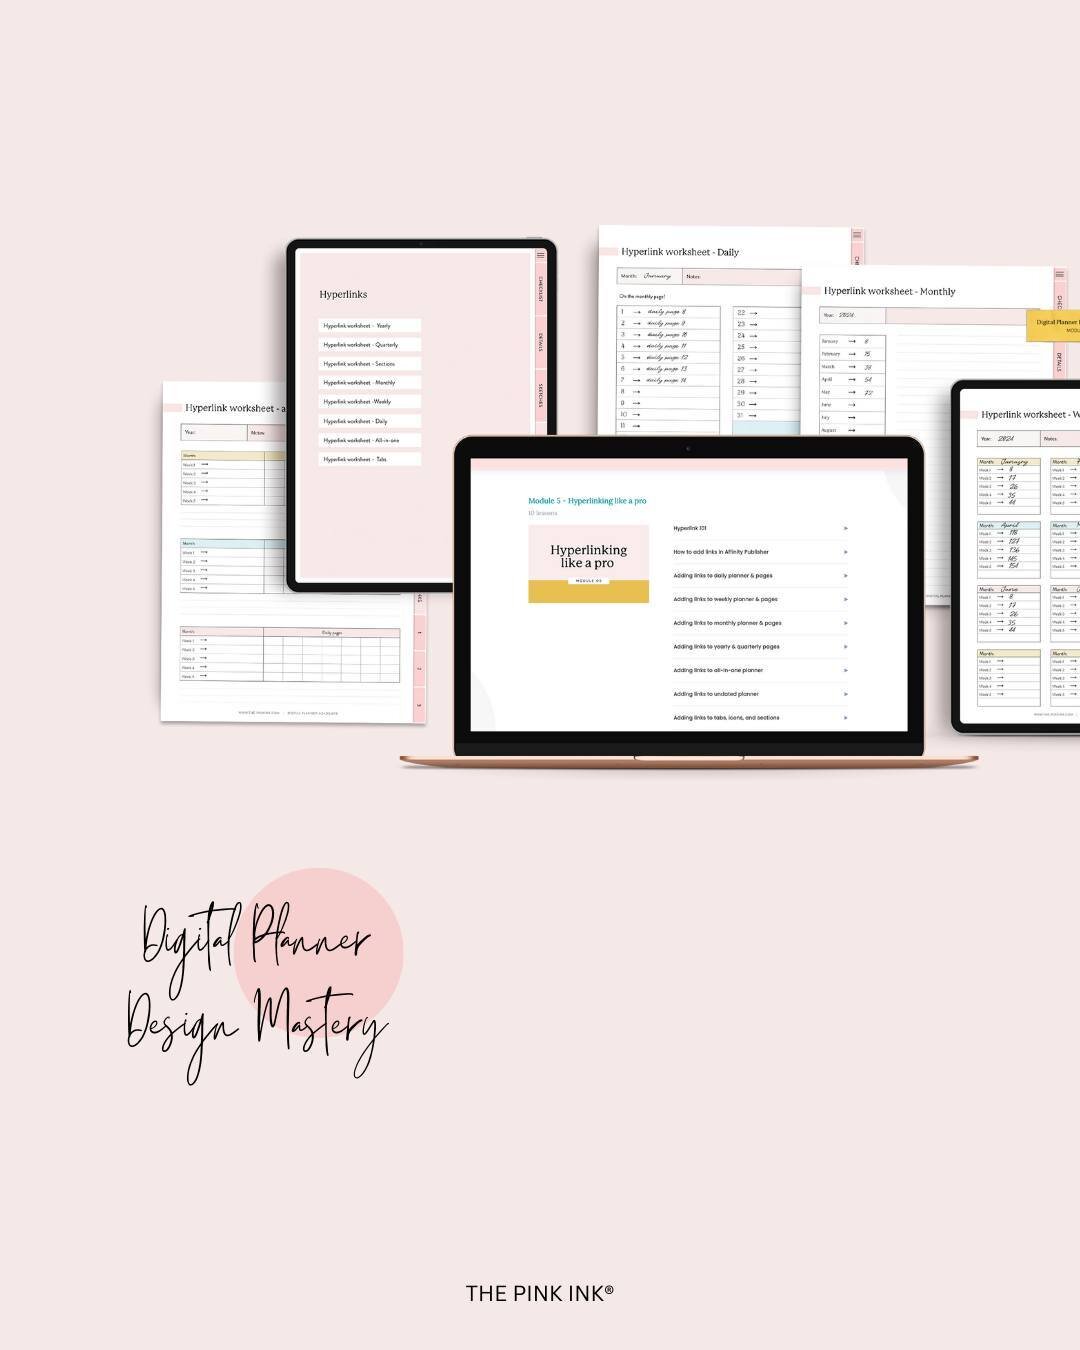 Struggling to tackle hyperlinking in your digital planner? 🤔⁠
⁠
Take a deep breath and relax because help is here!⁠
⁠
In the Digital Planner Design Mastery course, I got you covered every step of the way 💡⁠
⁠
No more feeling lost or overwhelmed.⁠
⁠